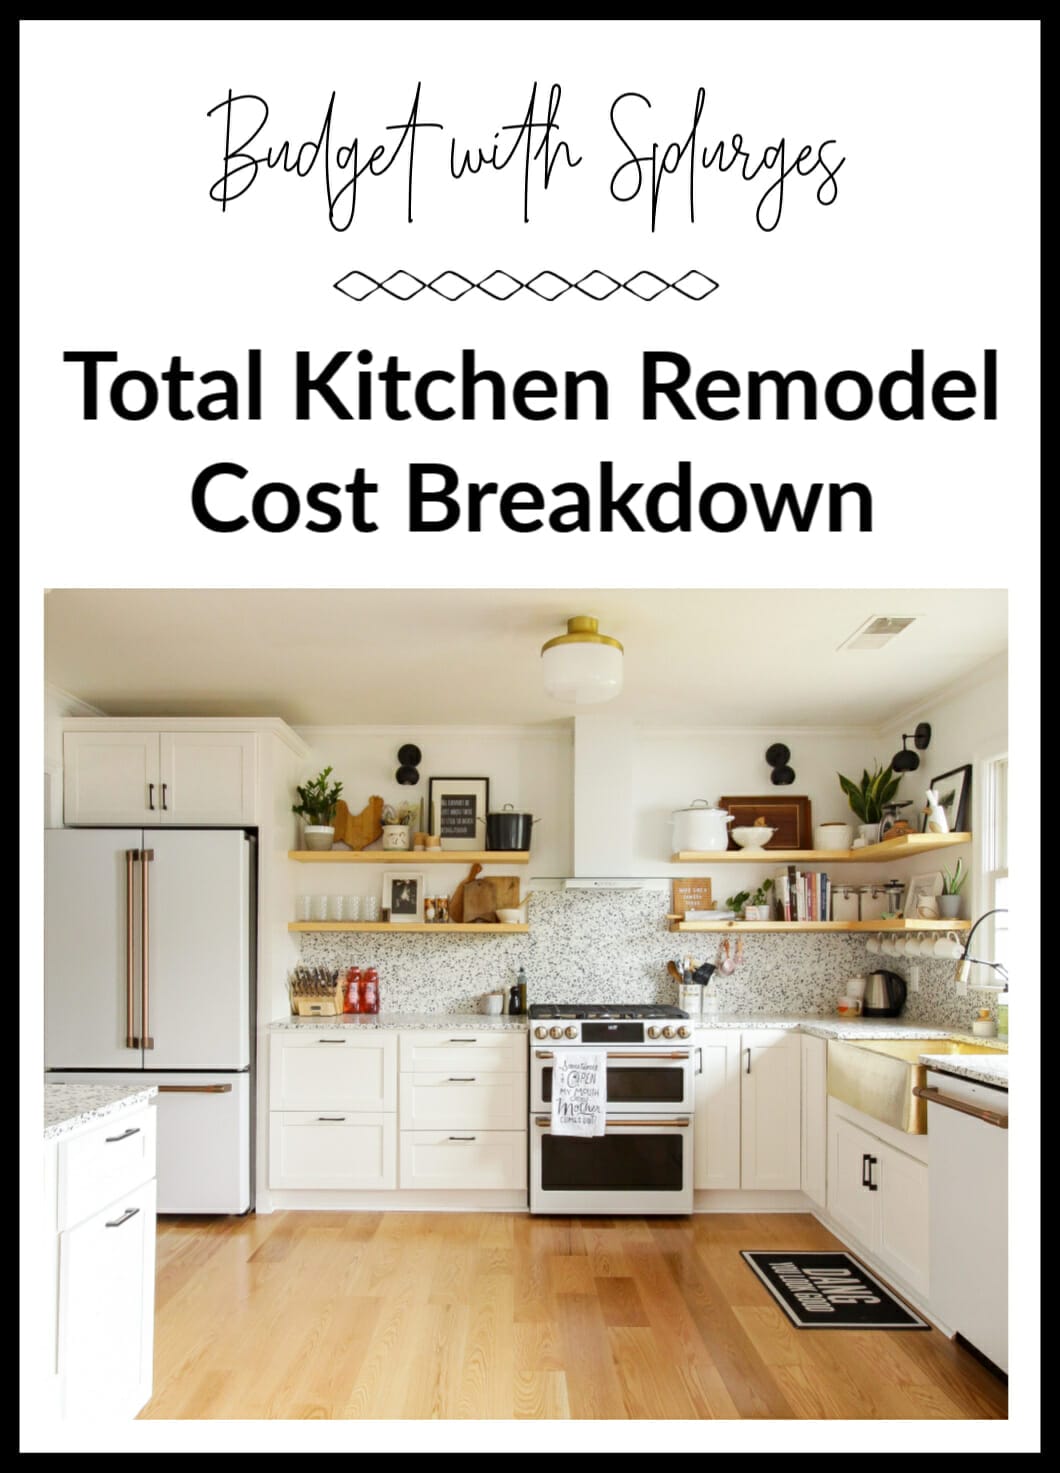 cost of kitchen remdeling work